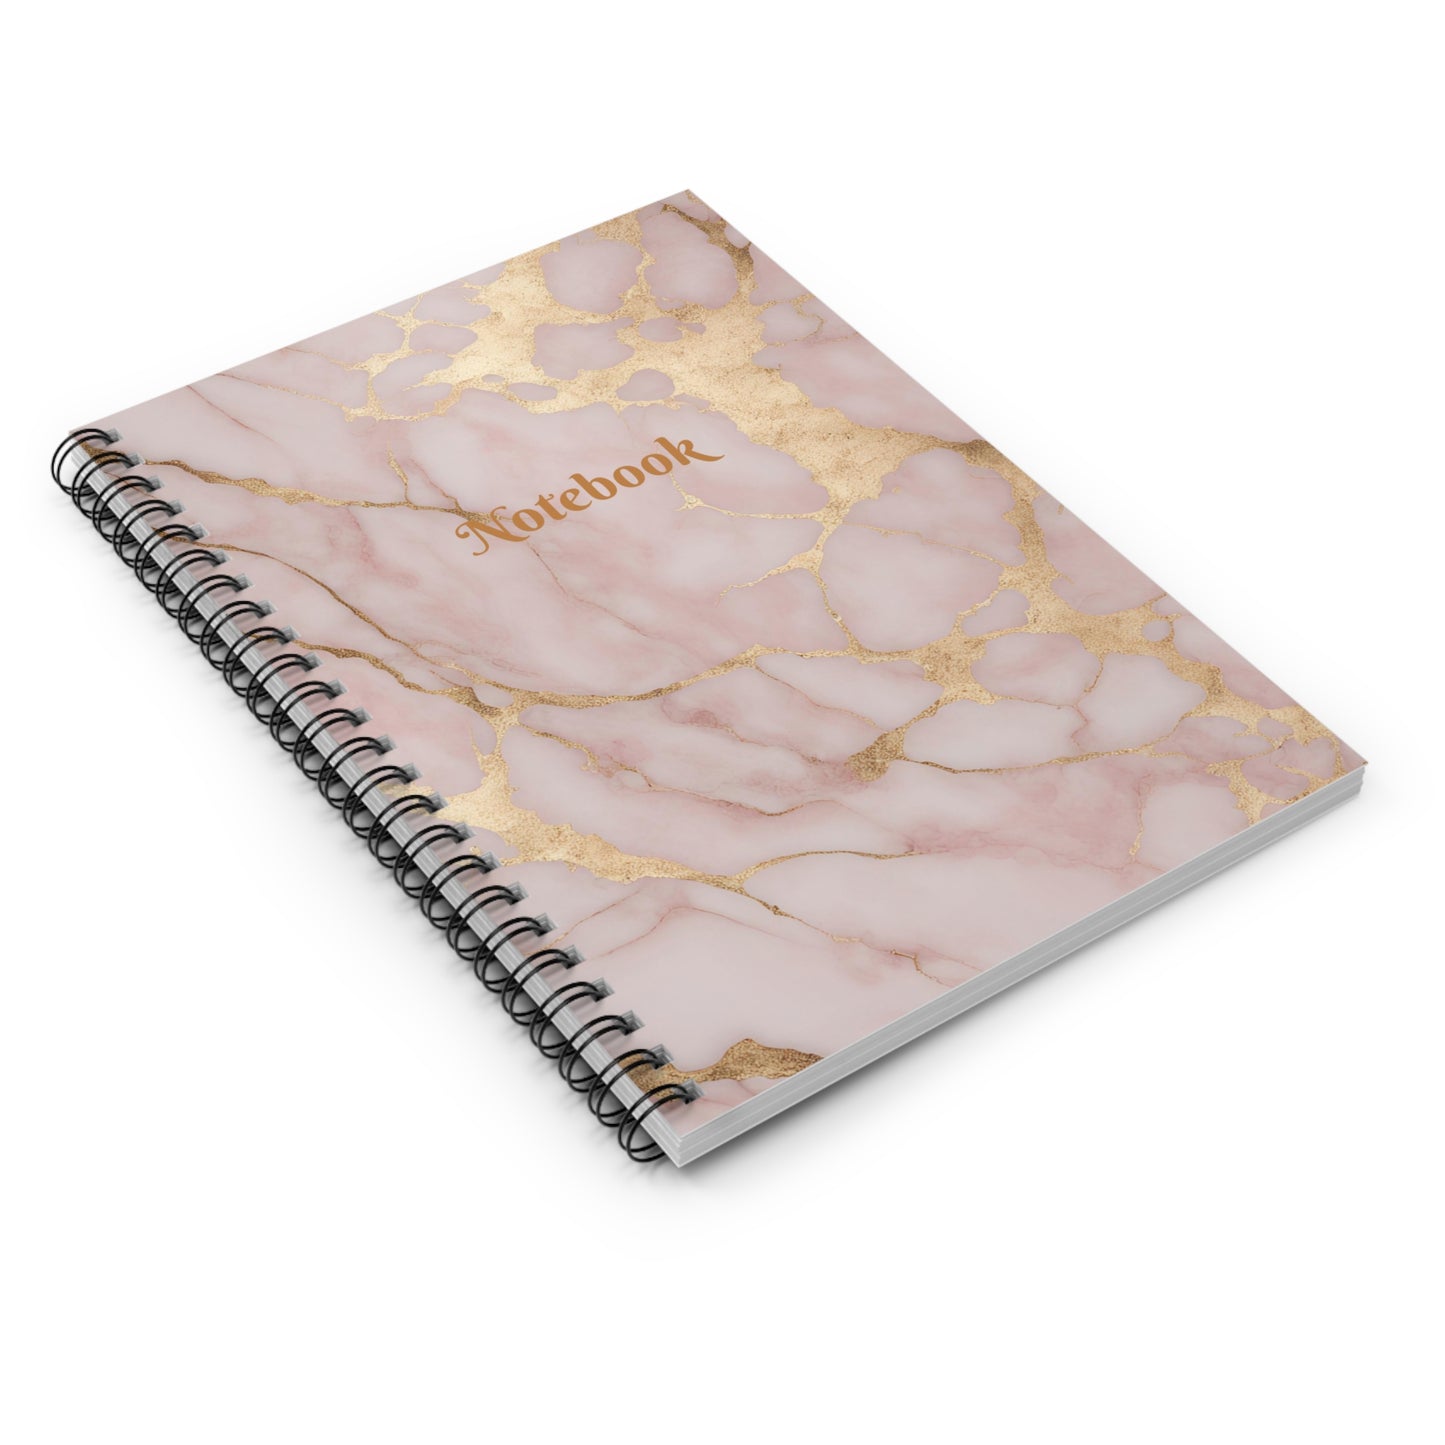 Pink Marble with Gold Speckles Spiral Notebook - Ruled Line